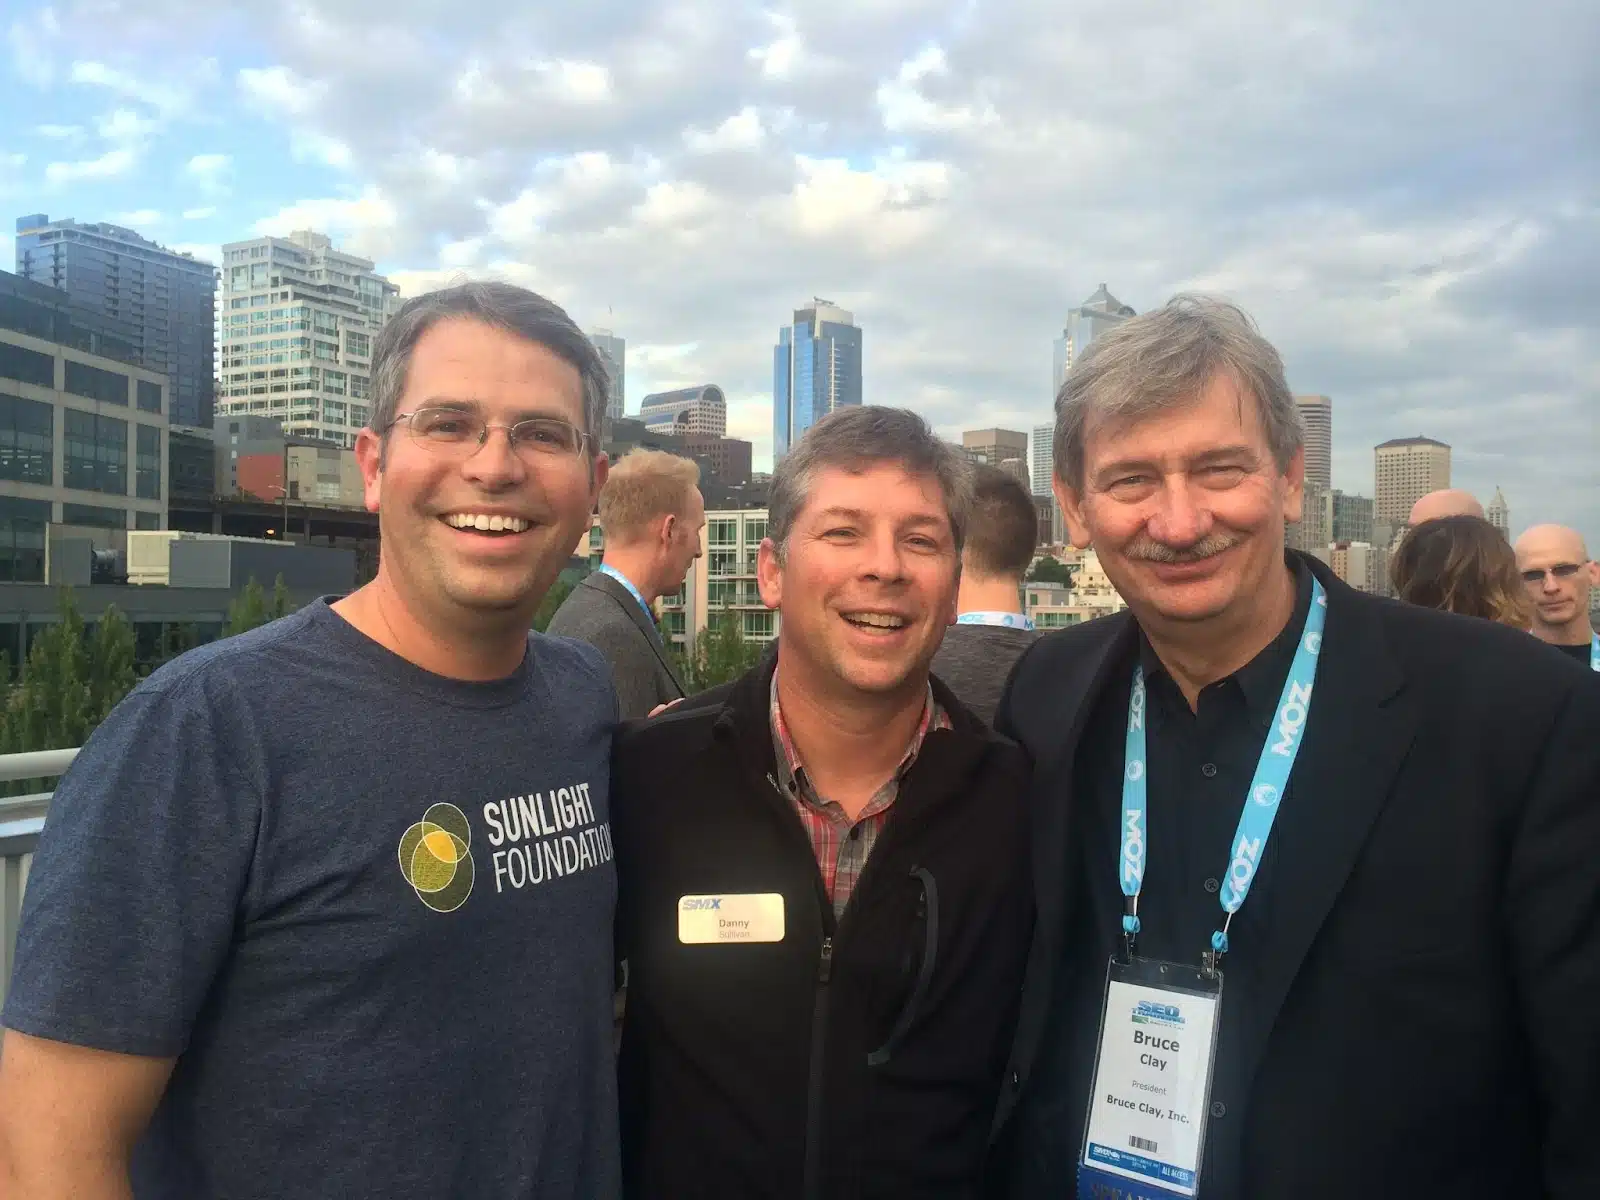 From left to right: Matt Cutts, Danny Sullivan and Bruce Clay at an SMX Conference in Seattle.